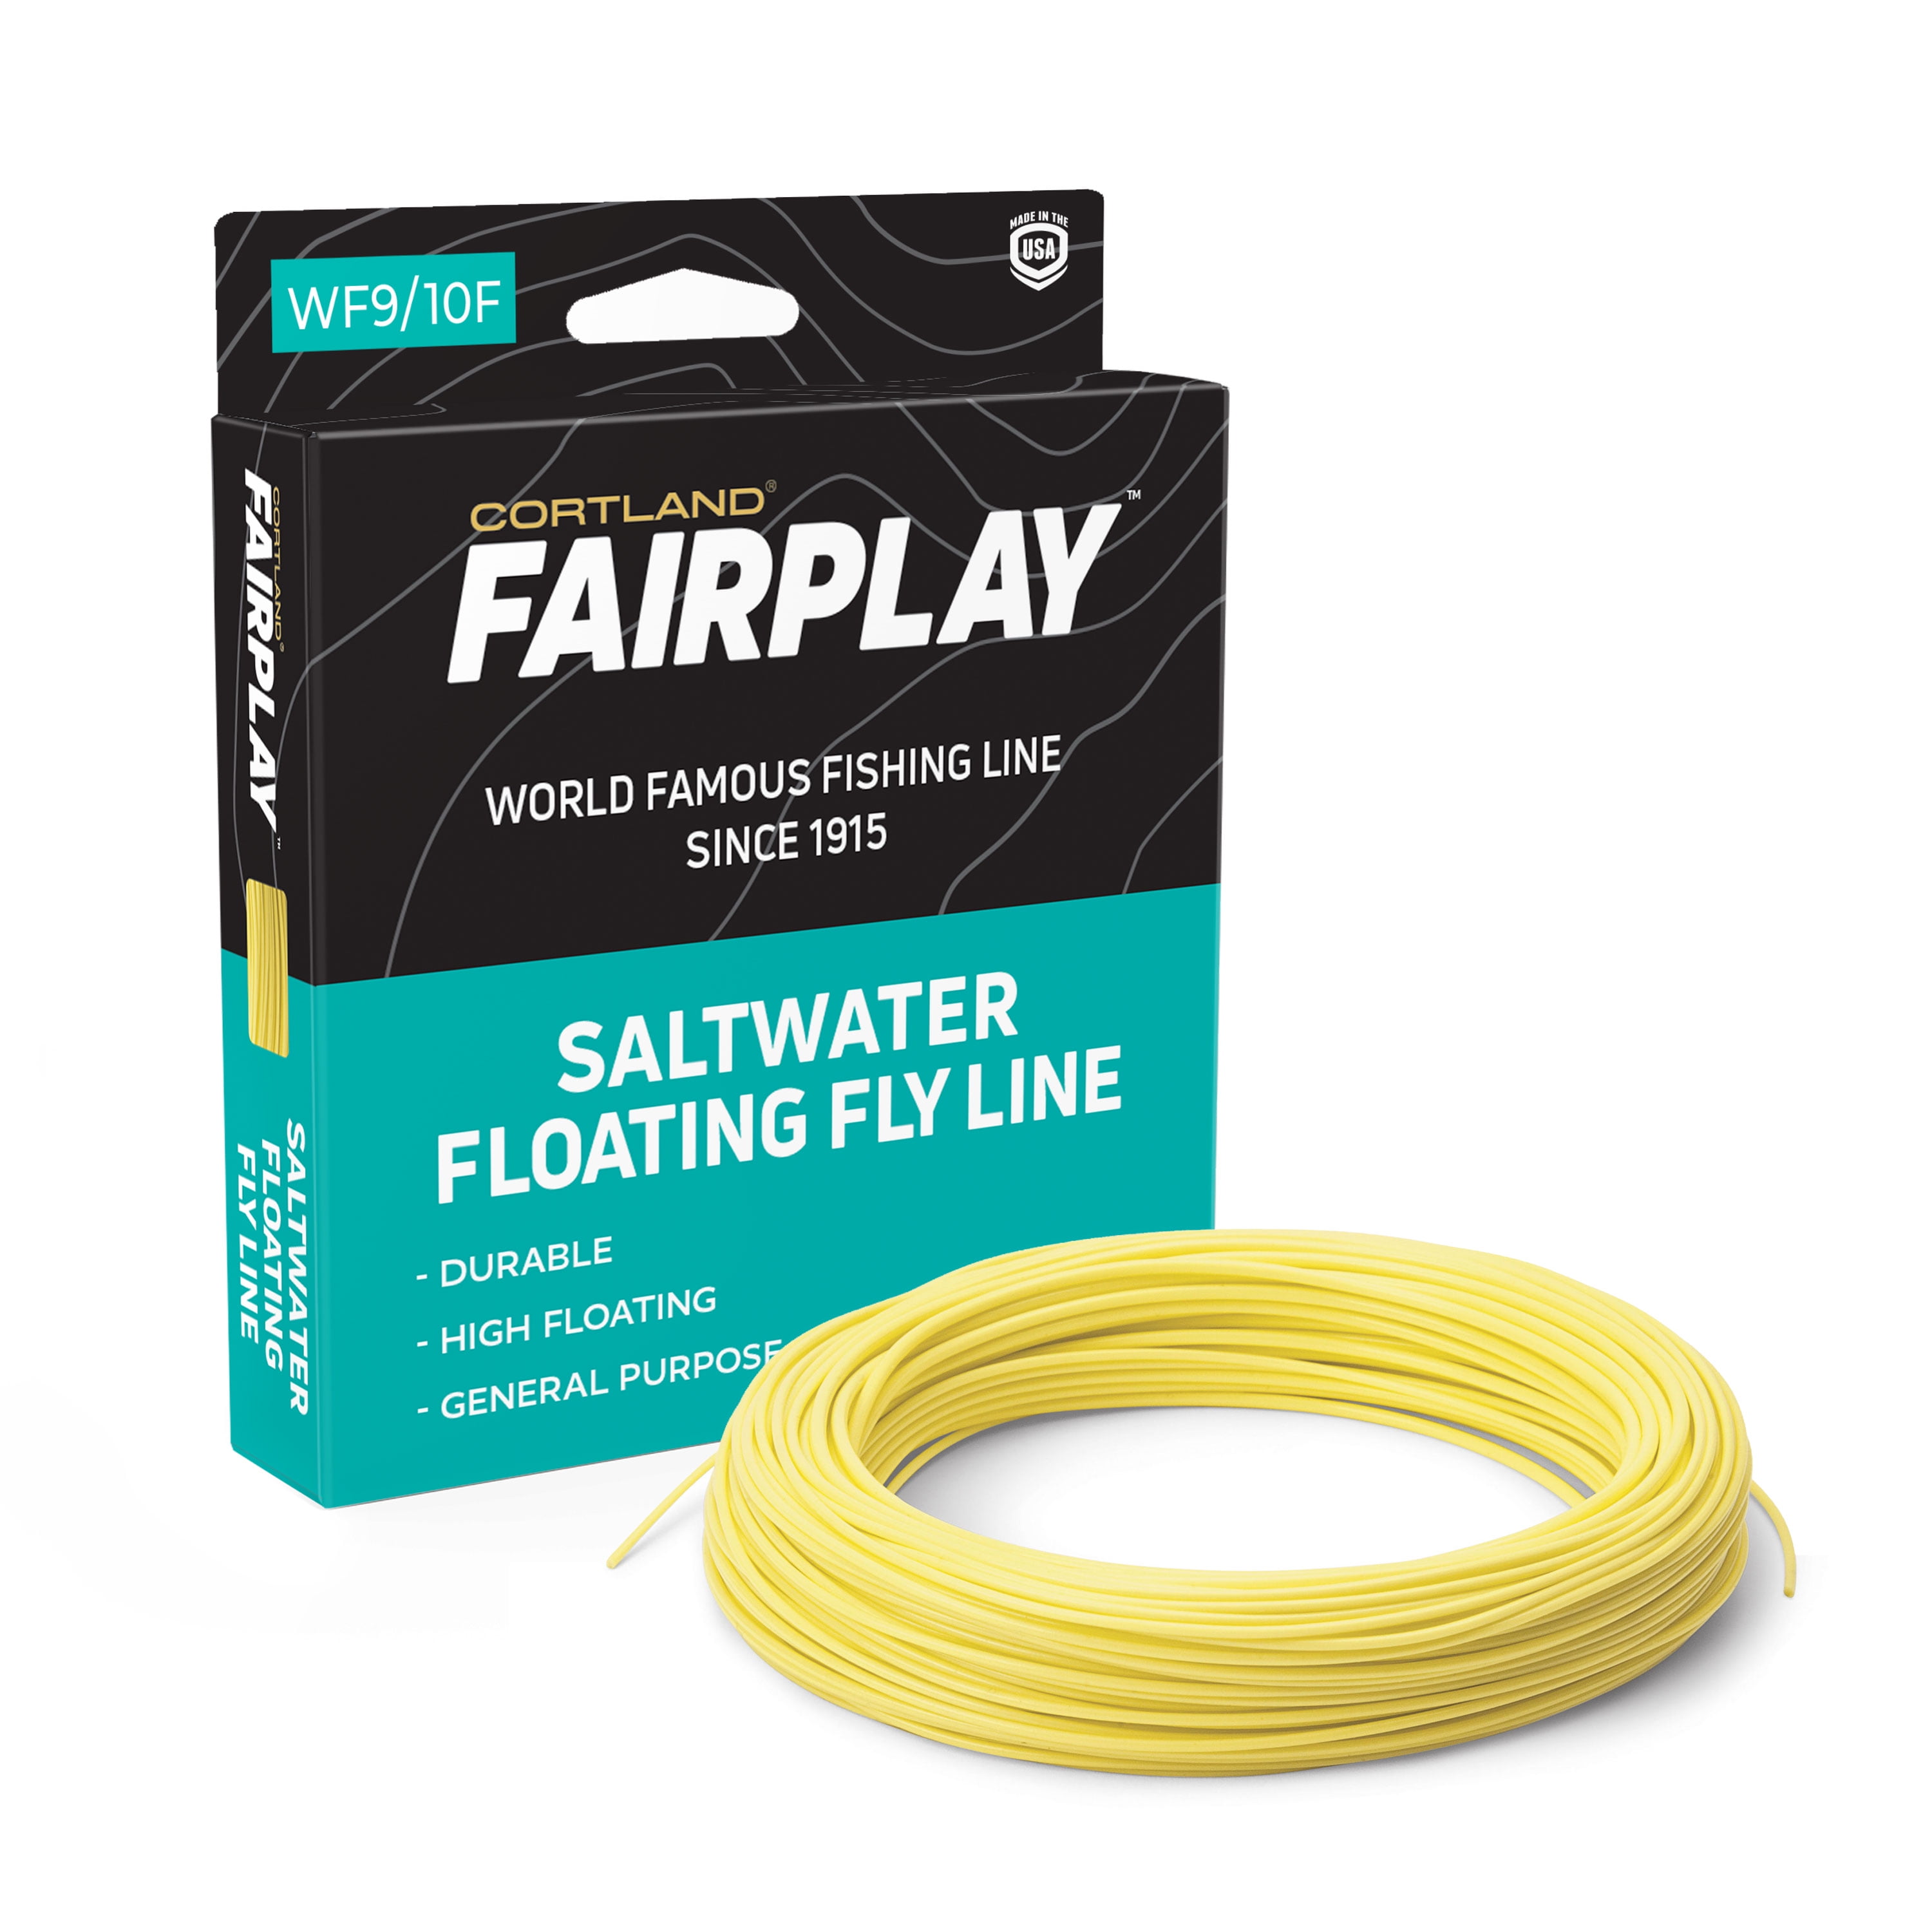 Cortland Fairplay Saltwater Fly Line, WF9/10F, 90Ft, 326118